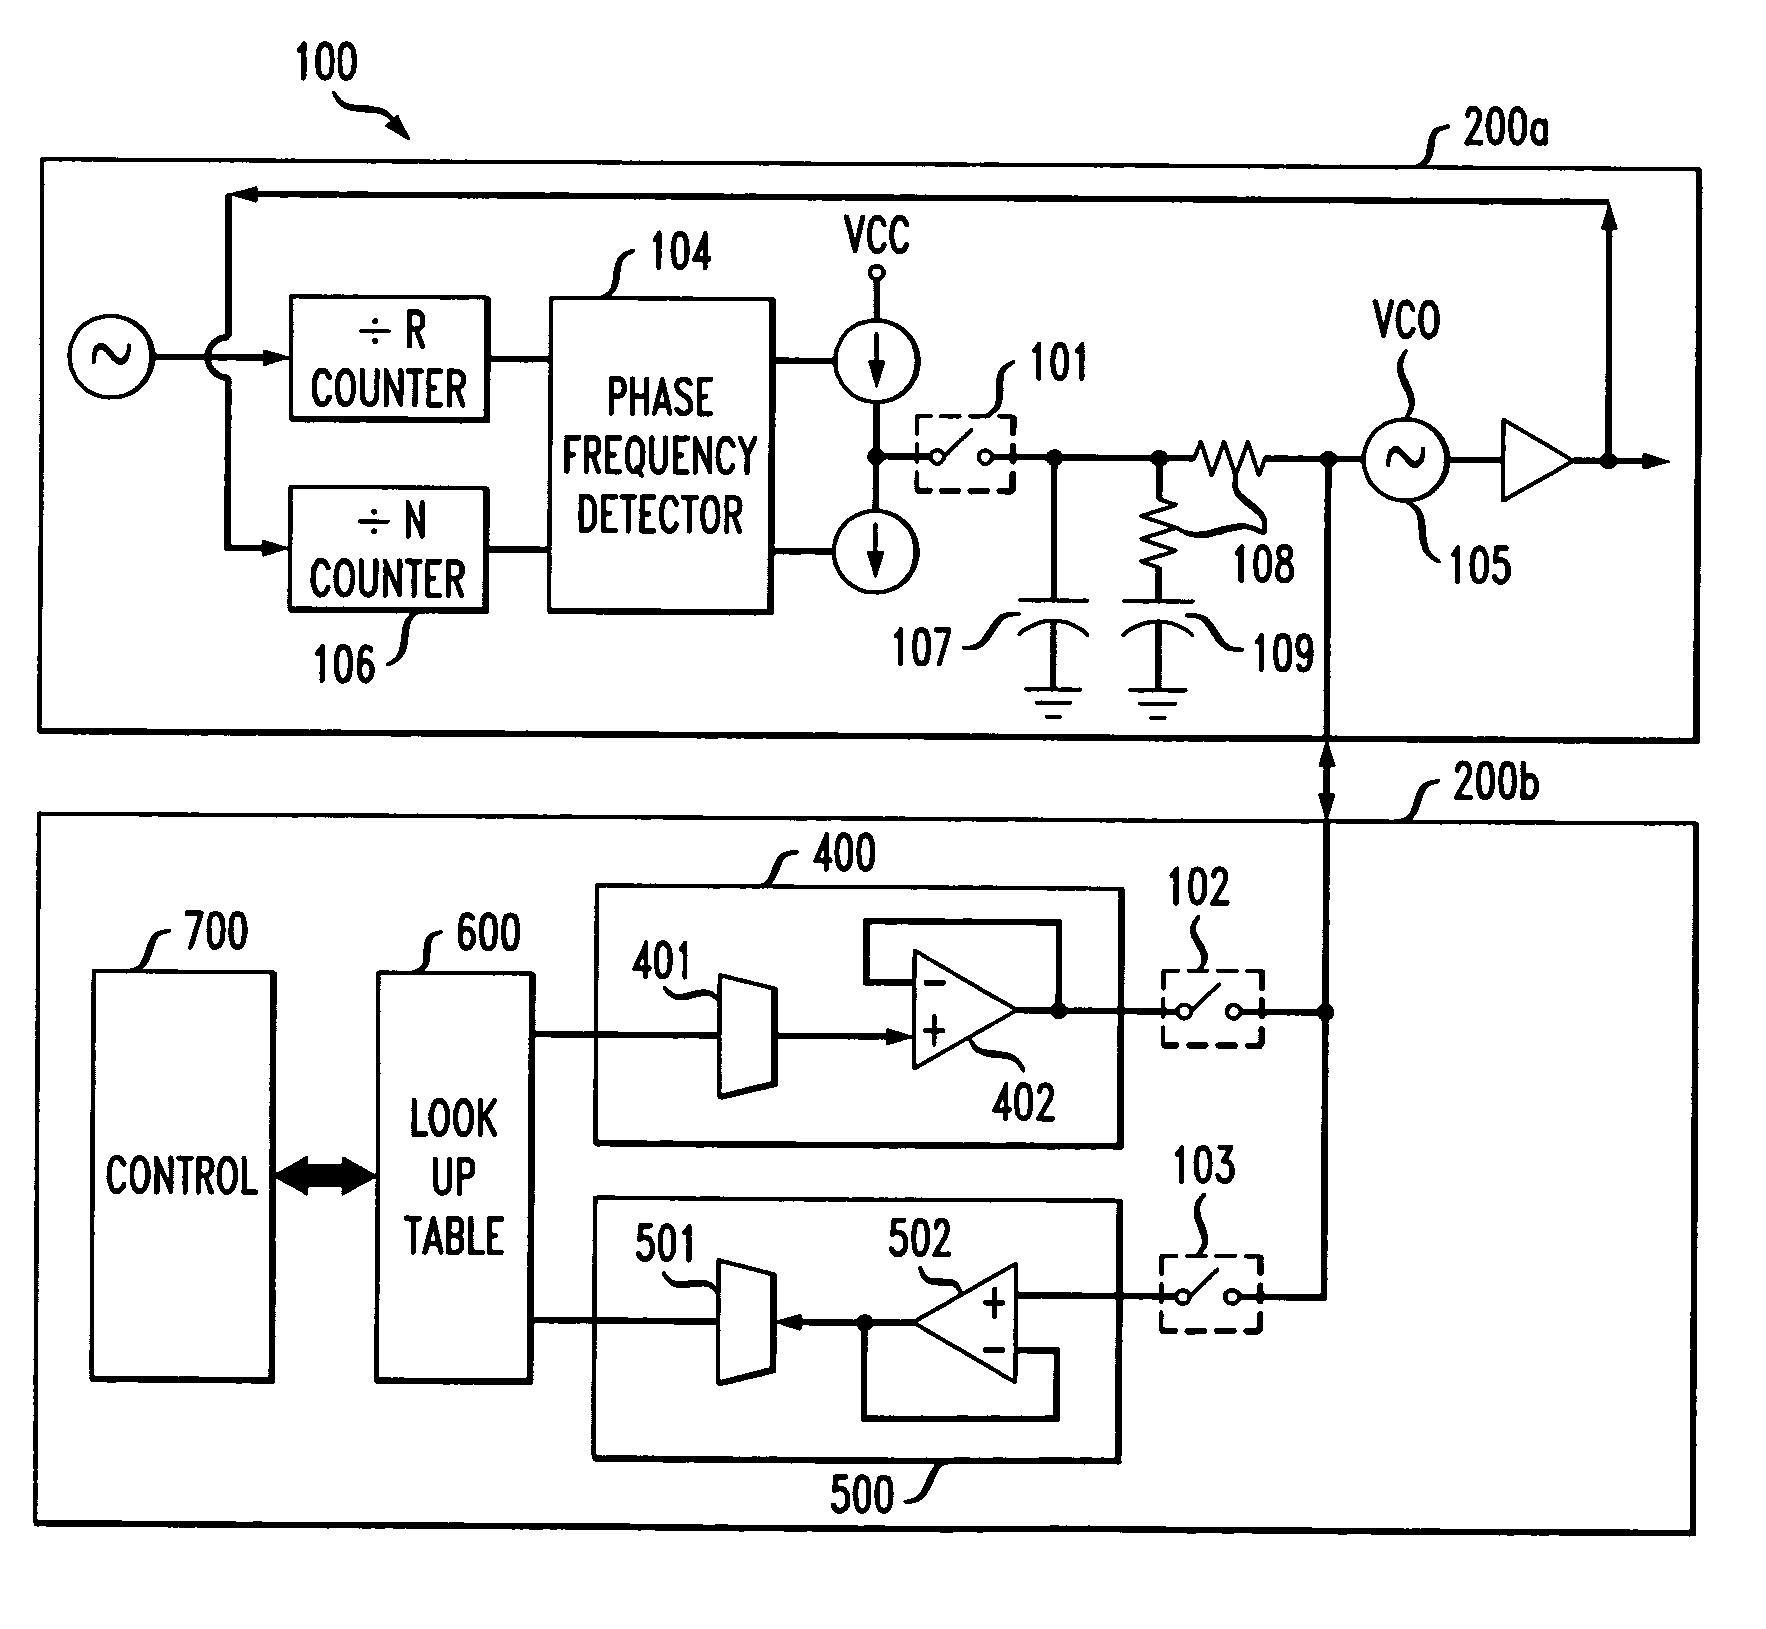 Methods and devices for improving the switching times of PLLs